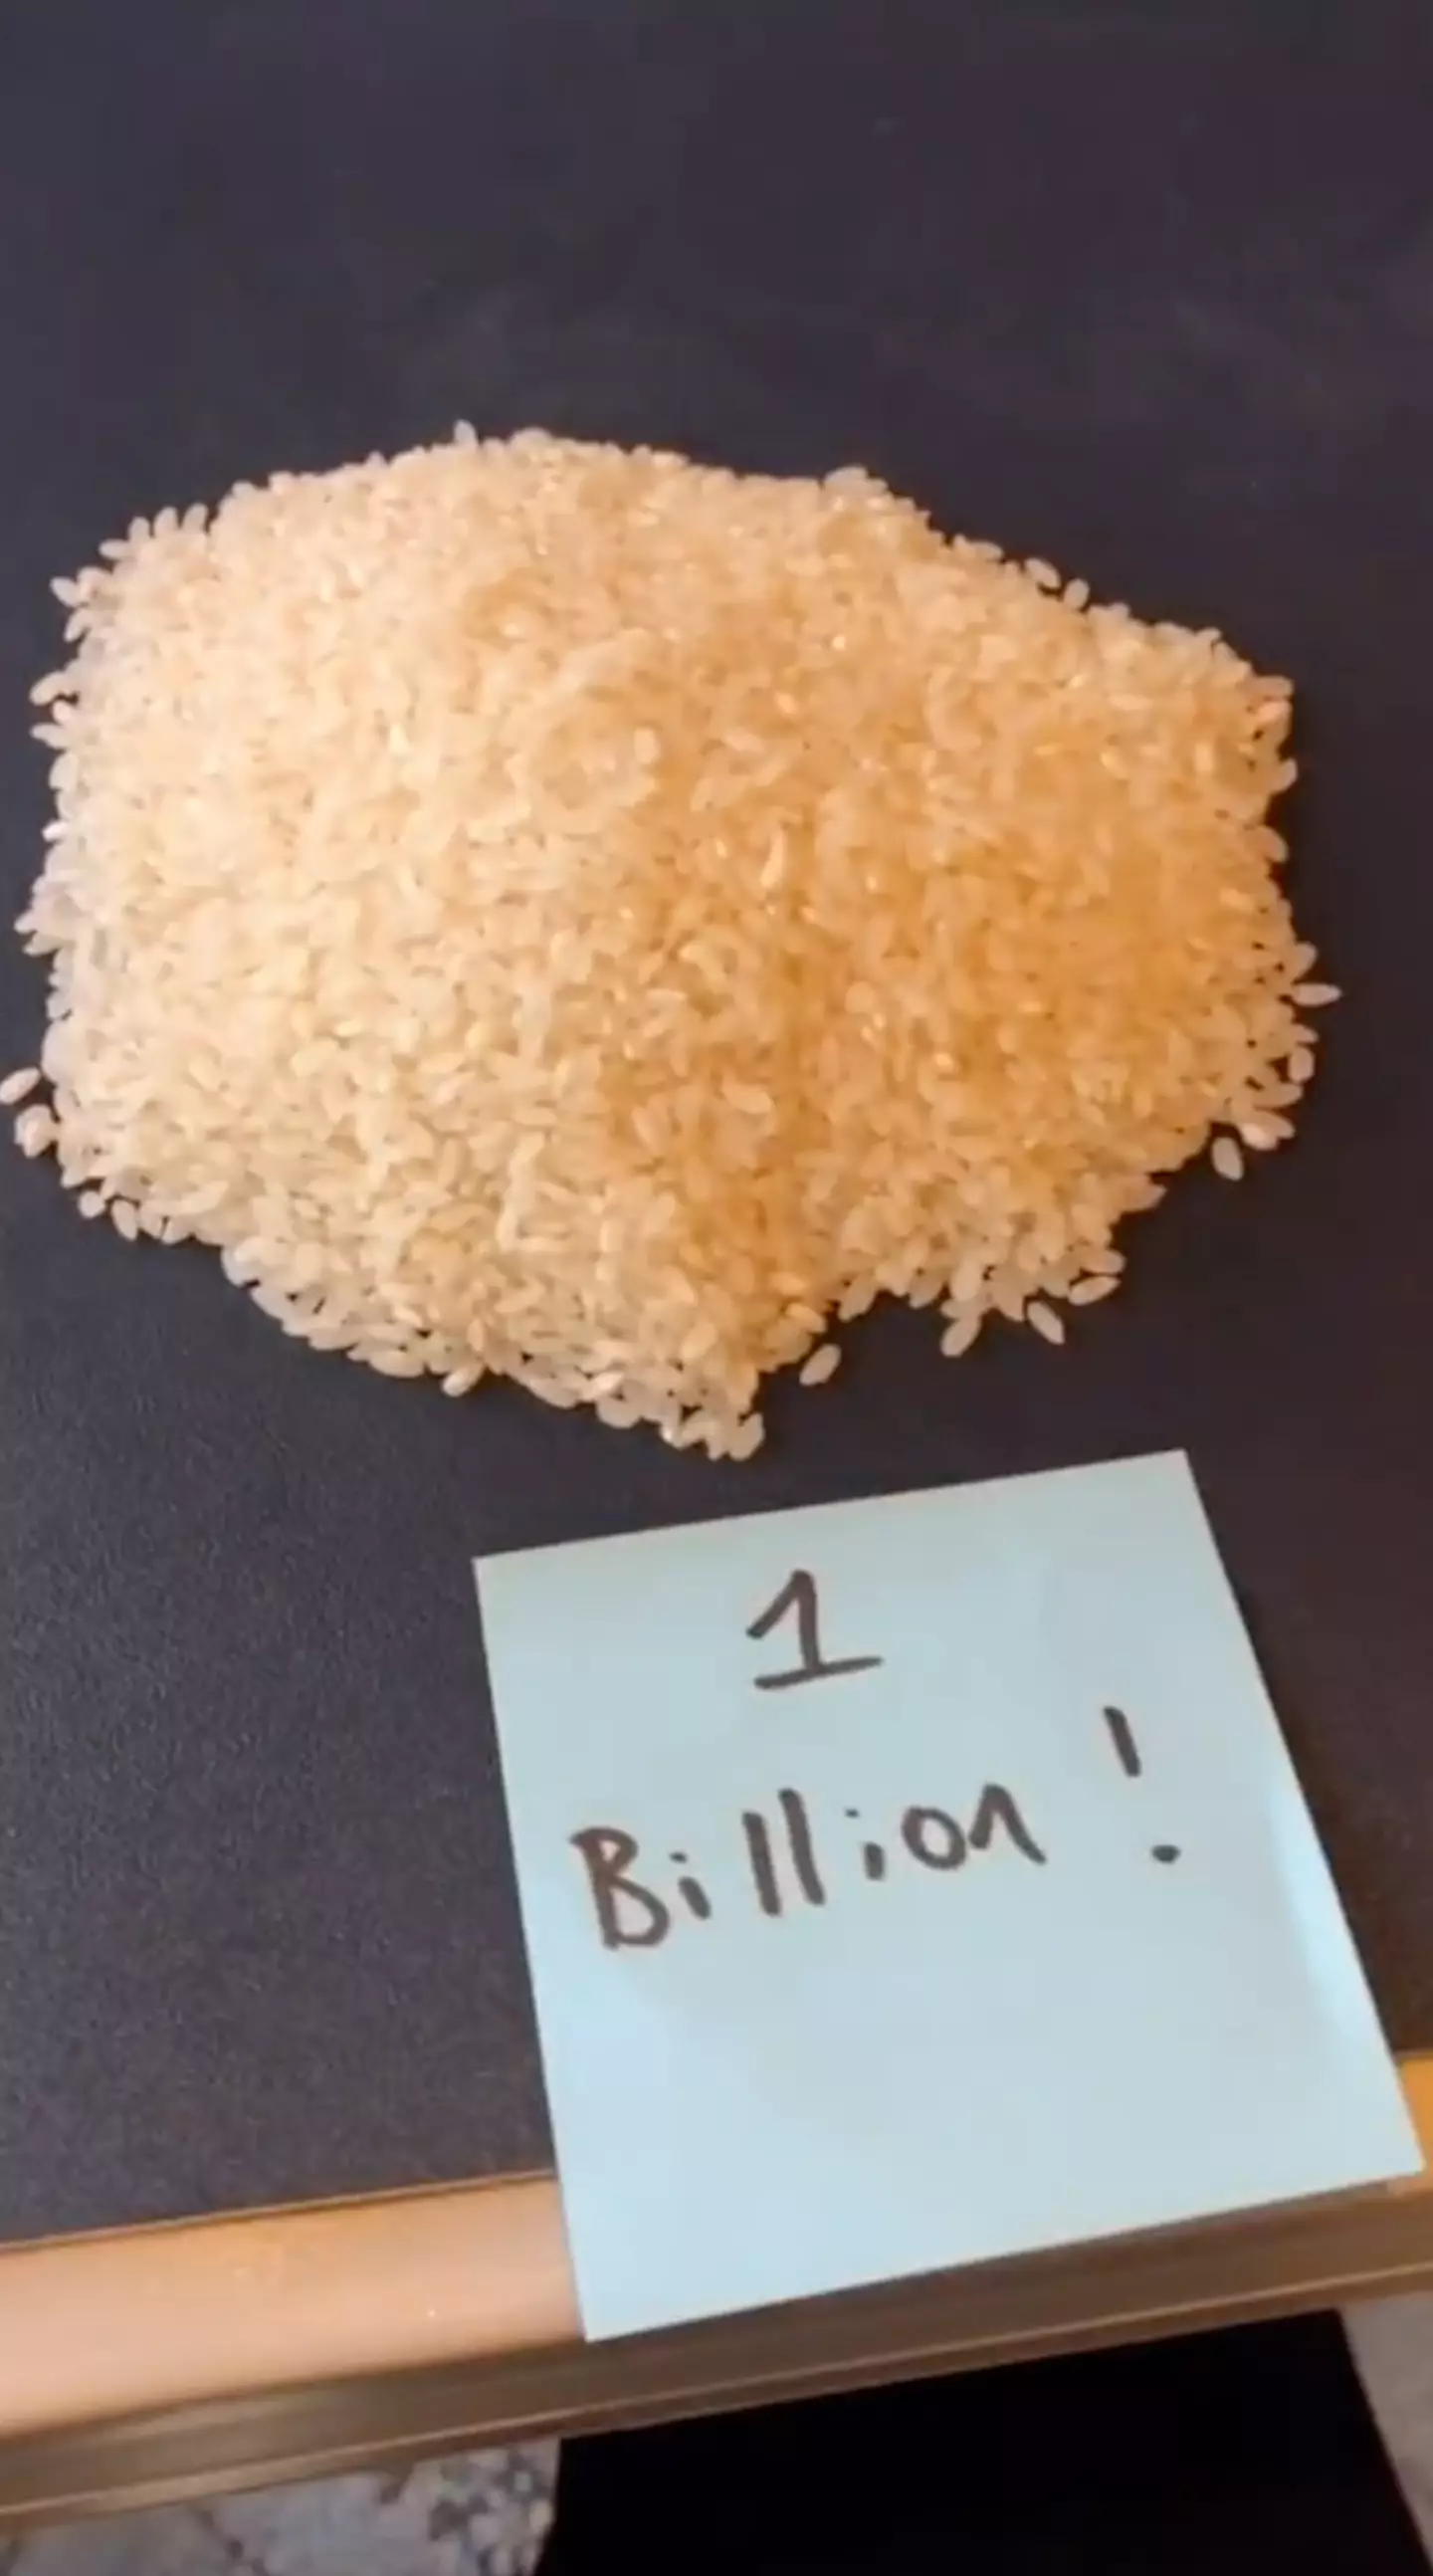 Yang uses the grains to help us visualise just how much money it is.